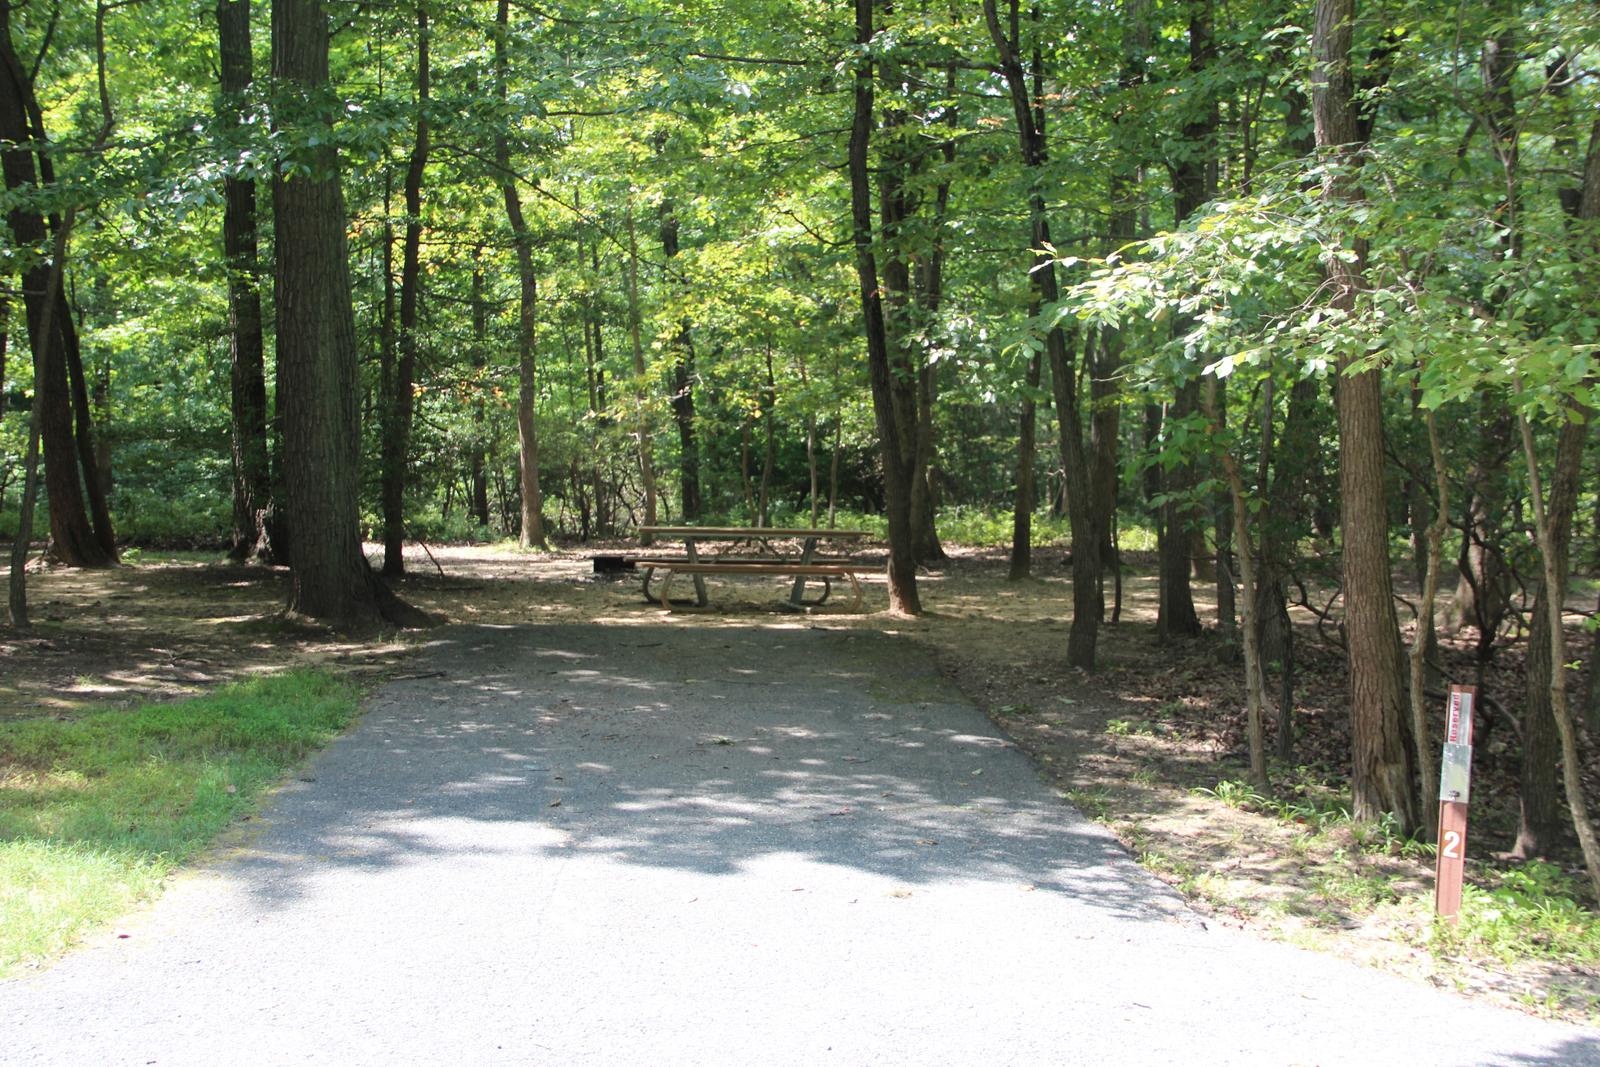 A02  A Loop of the Greenbelt Park Maryland campground